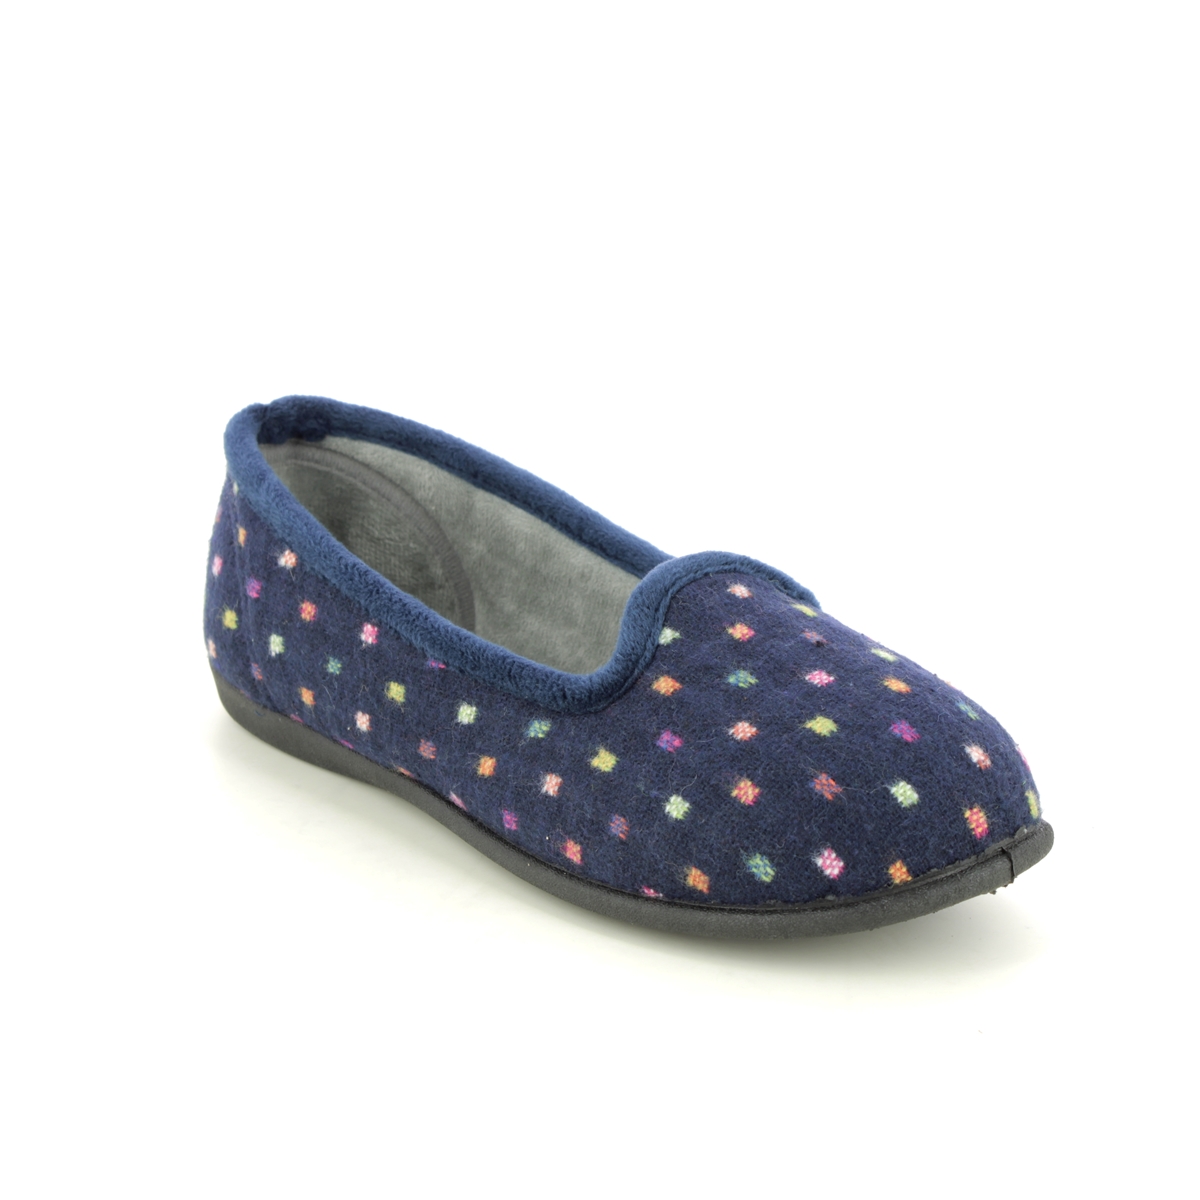 Padders Albertine Navy Womens slippers 3274-4076 in a Plain Microsuede in Size 4